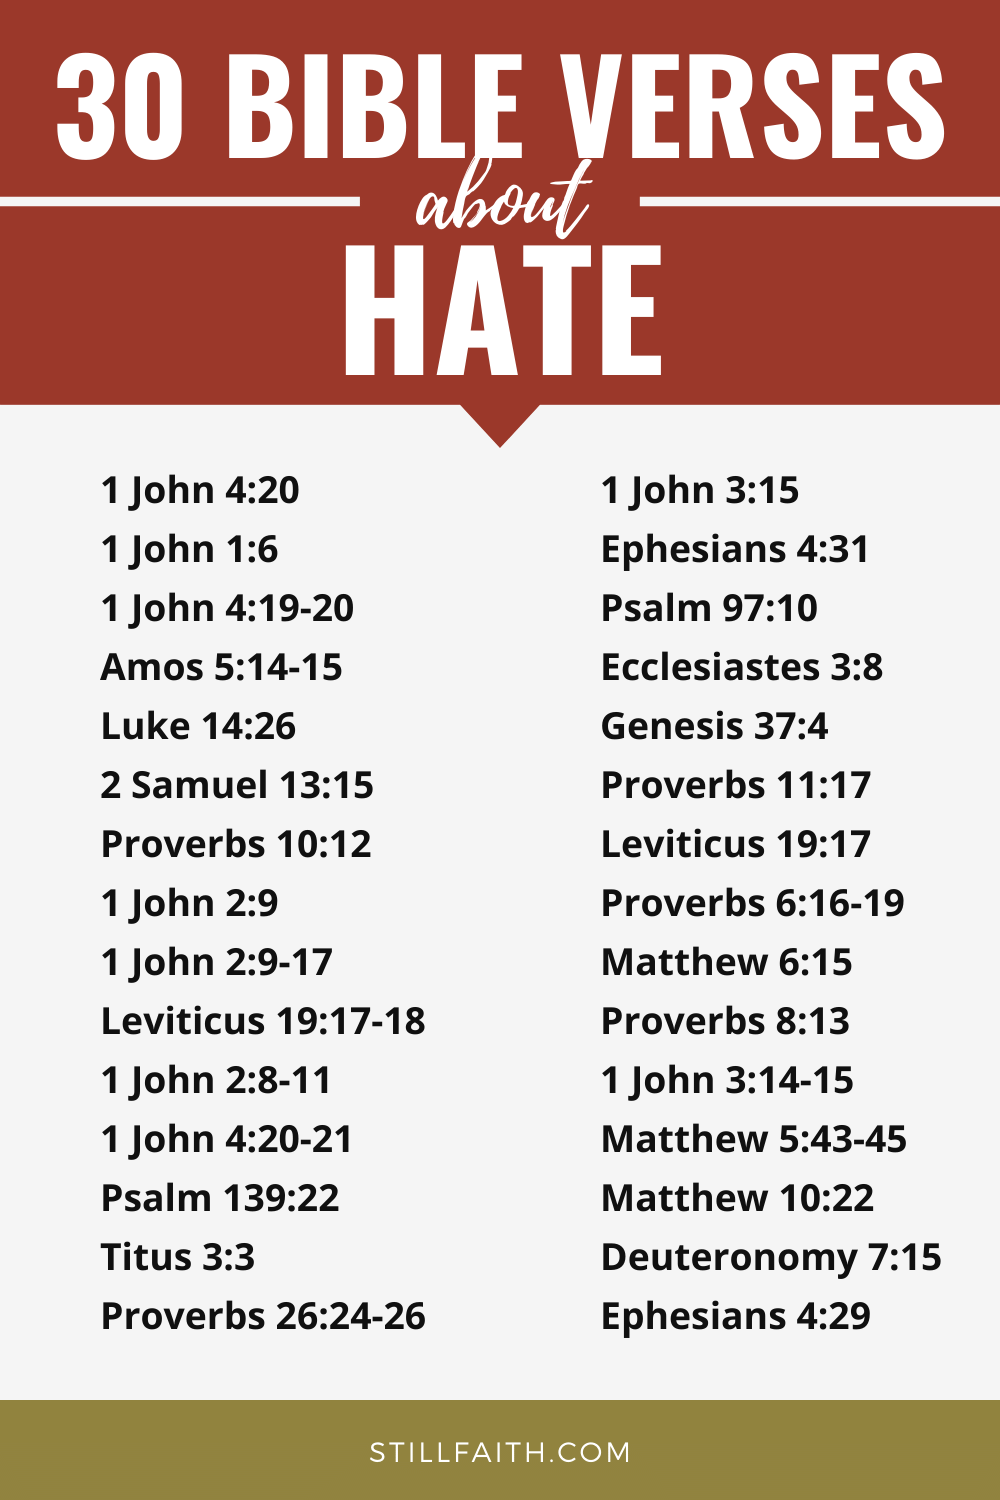 163 Bible Verses about Hate